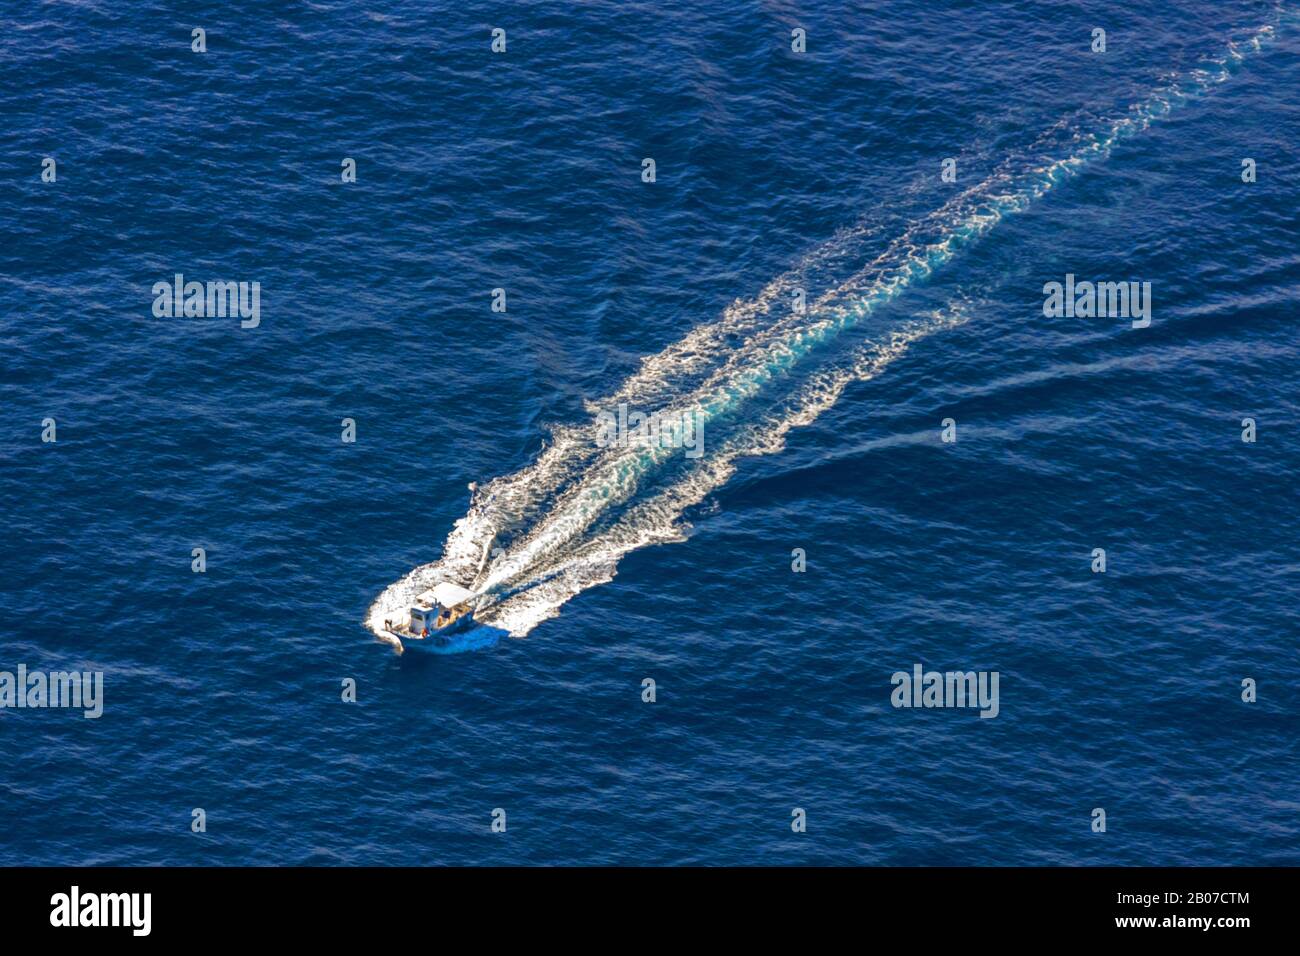 motorboat with trails on the Mediterranian Sea, 09.01.2020, aerial view, Spain, Balearic Islands, Majorca Stock Photo